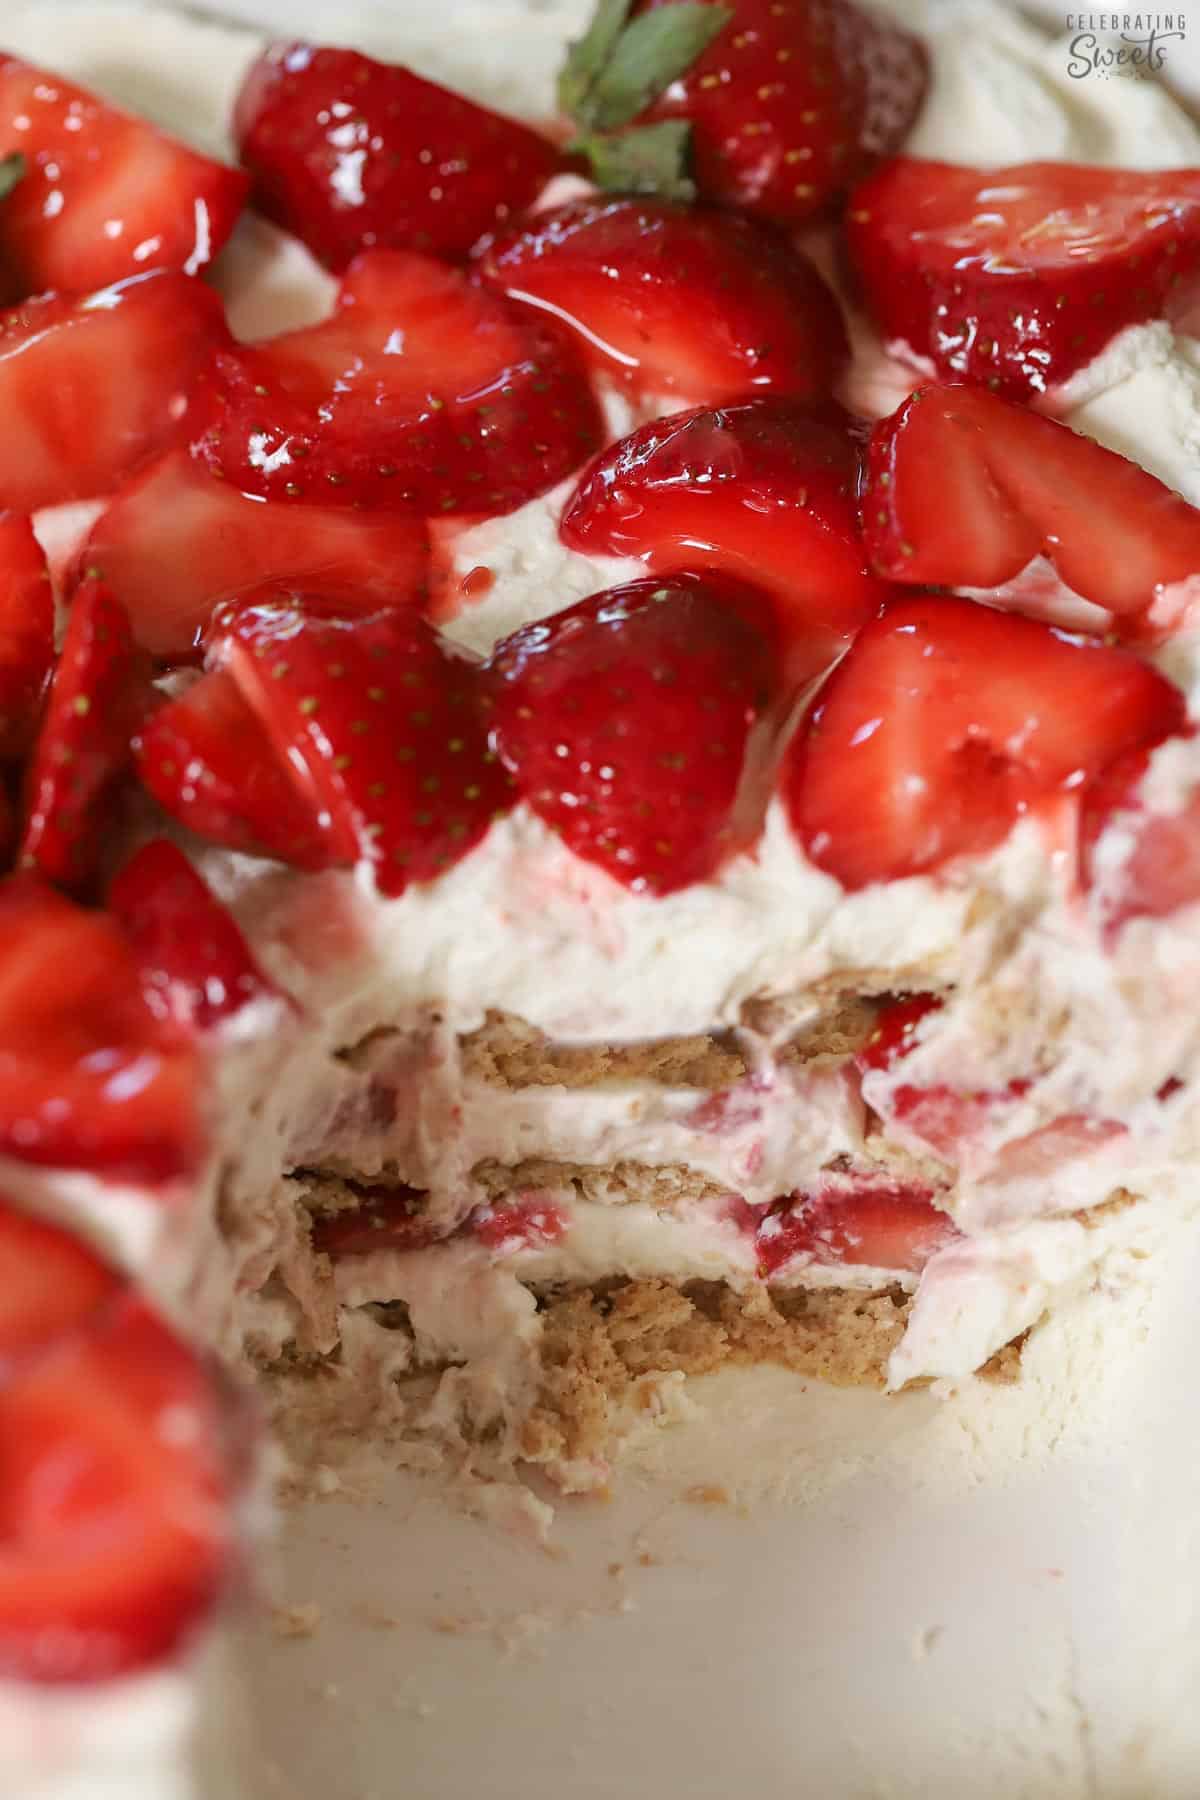 Strawberry icebox cake topped with fresh strawberries in a white baking dish.